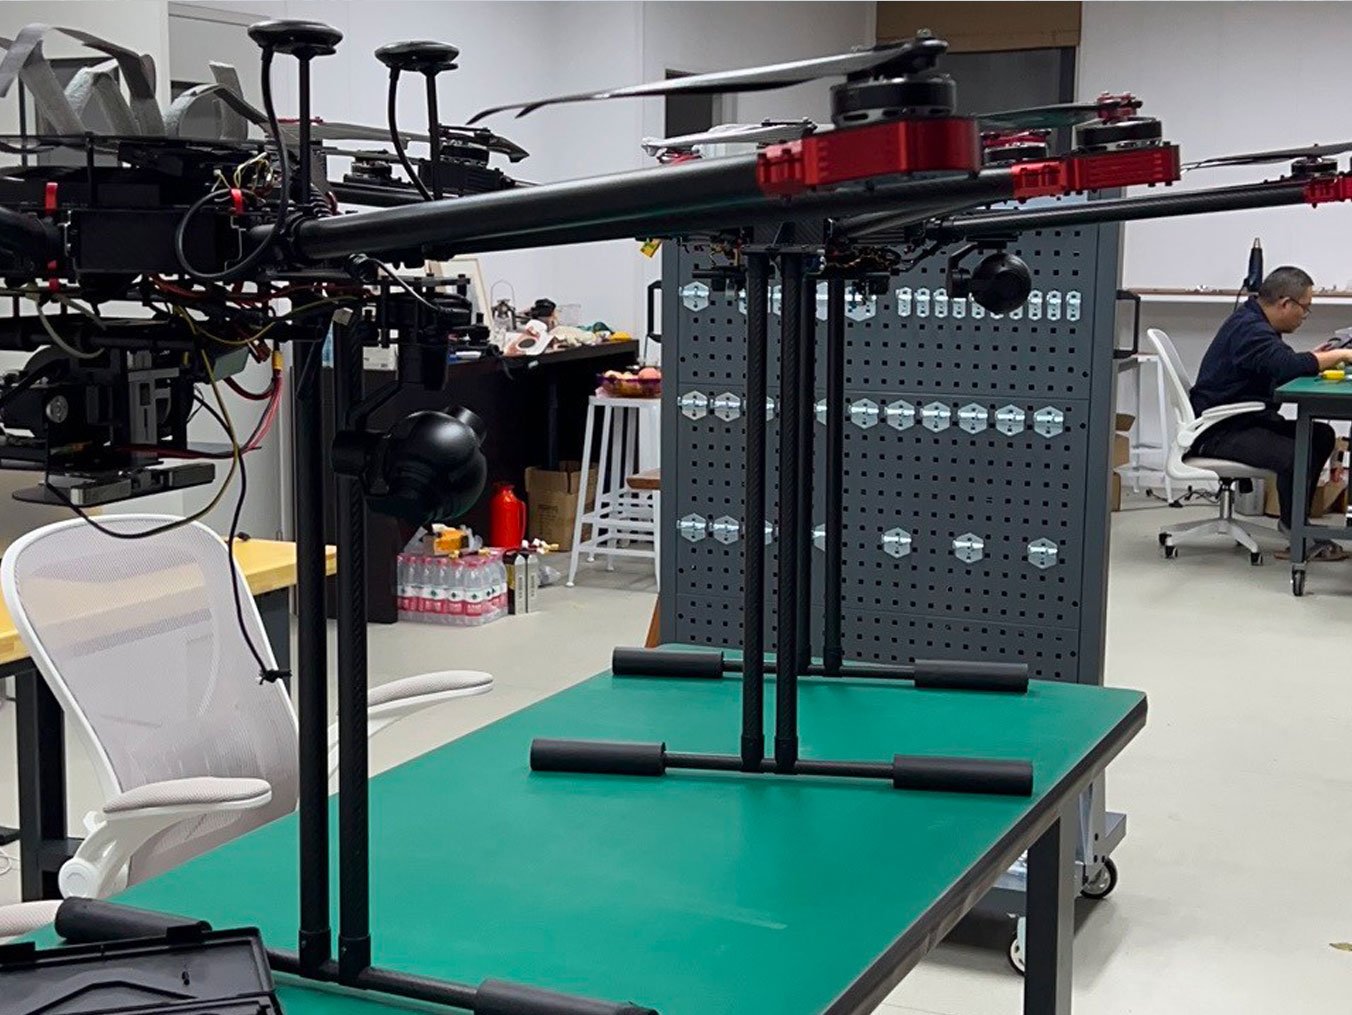 A pair of our RDST off-the-shelf delivery drones await final quality control testing.